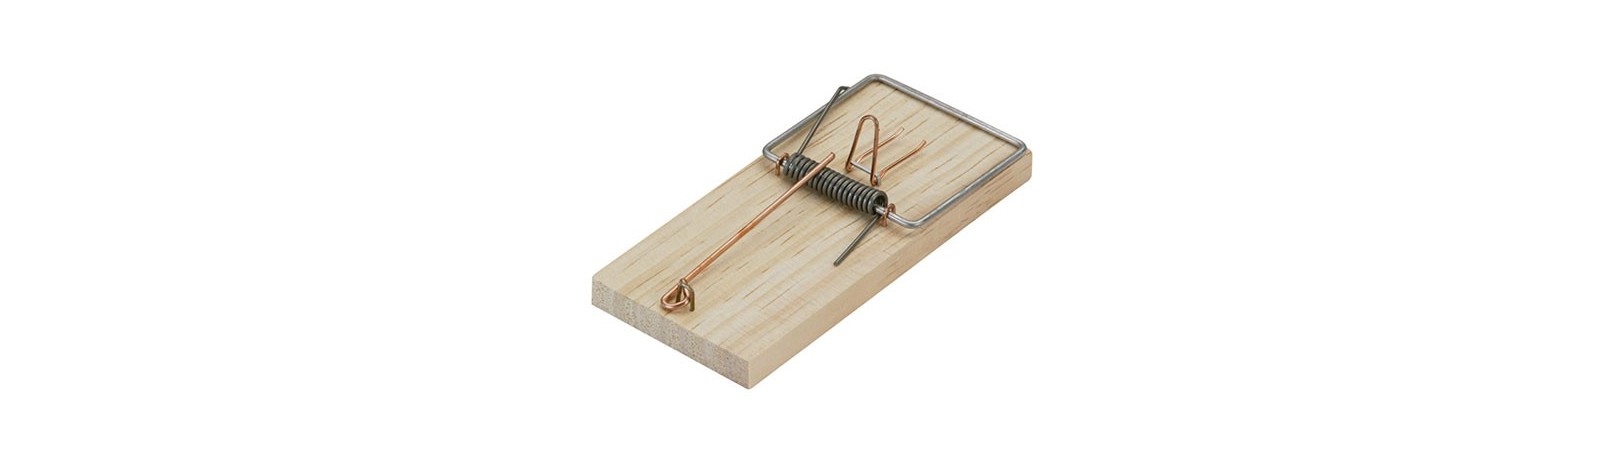 Small Mousetrap 2 Holes Wooden Mouse Trap 